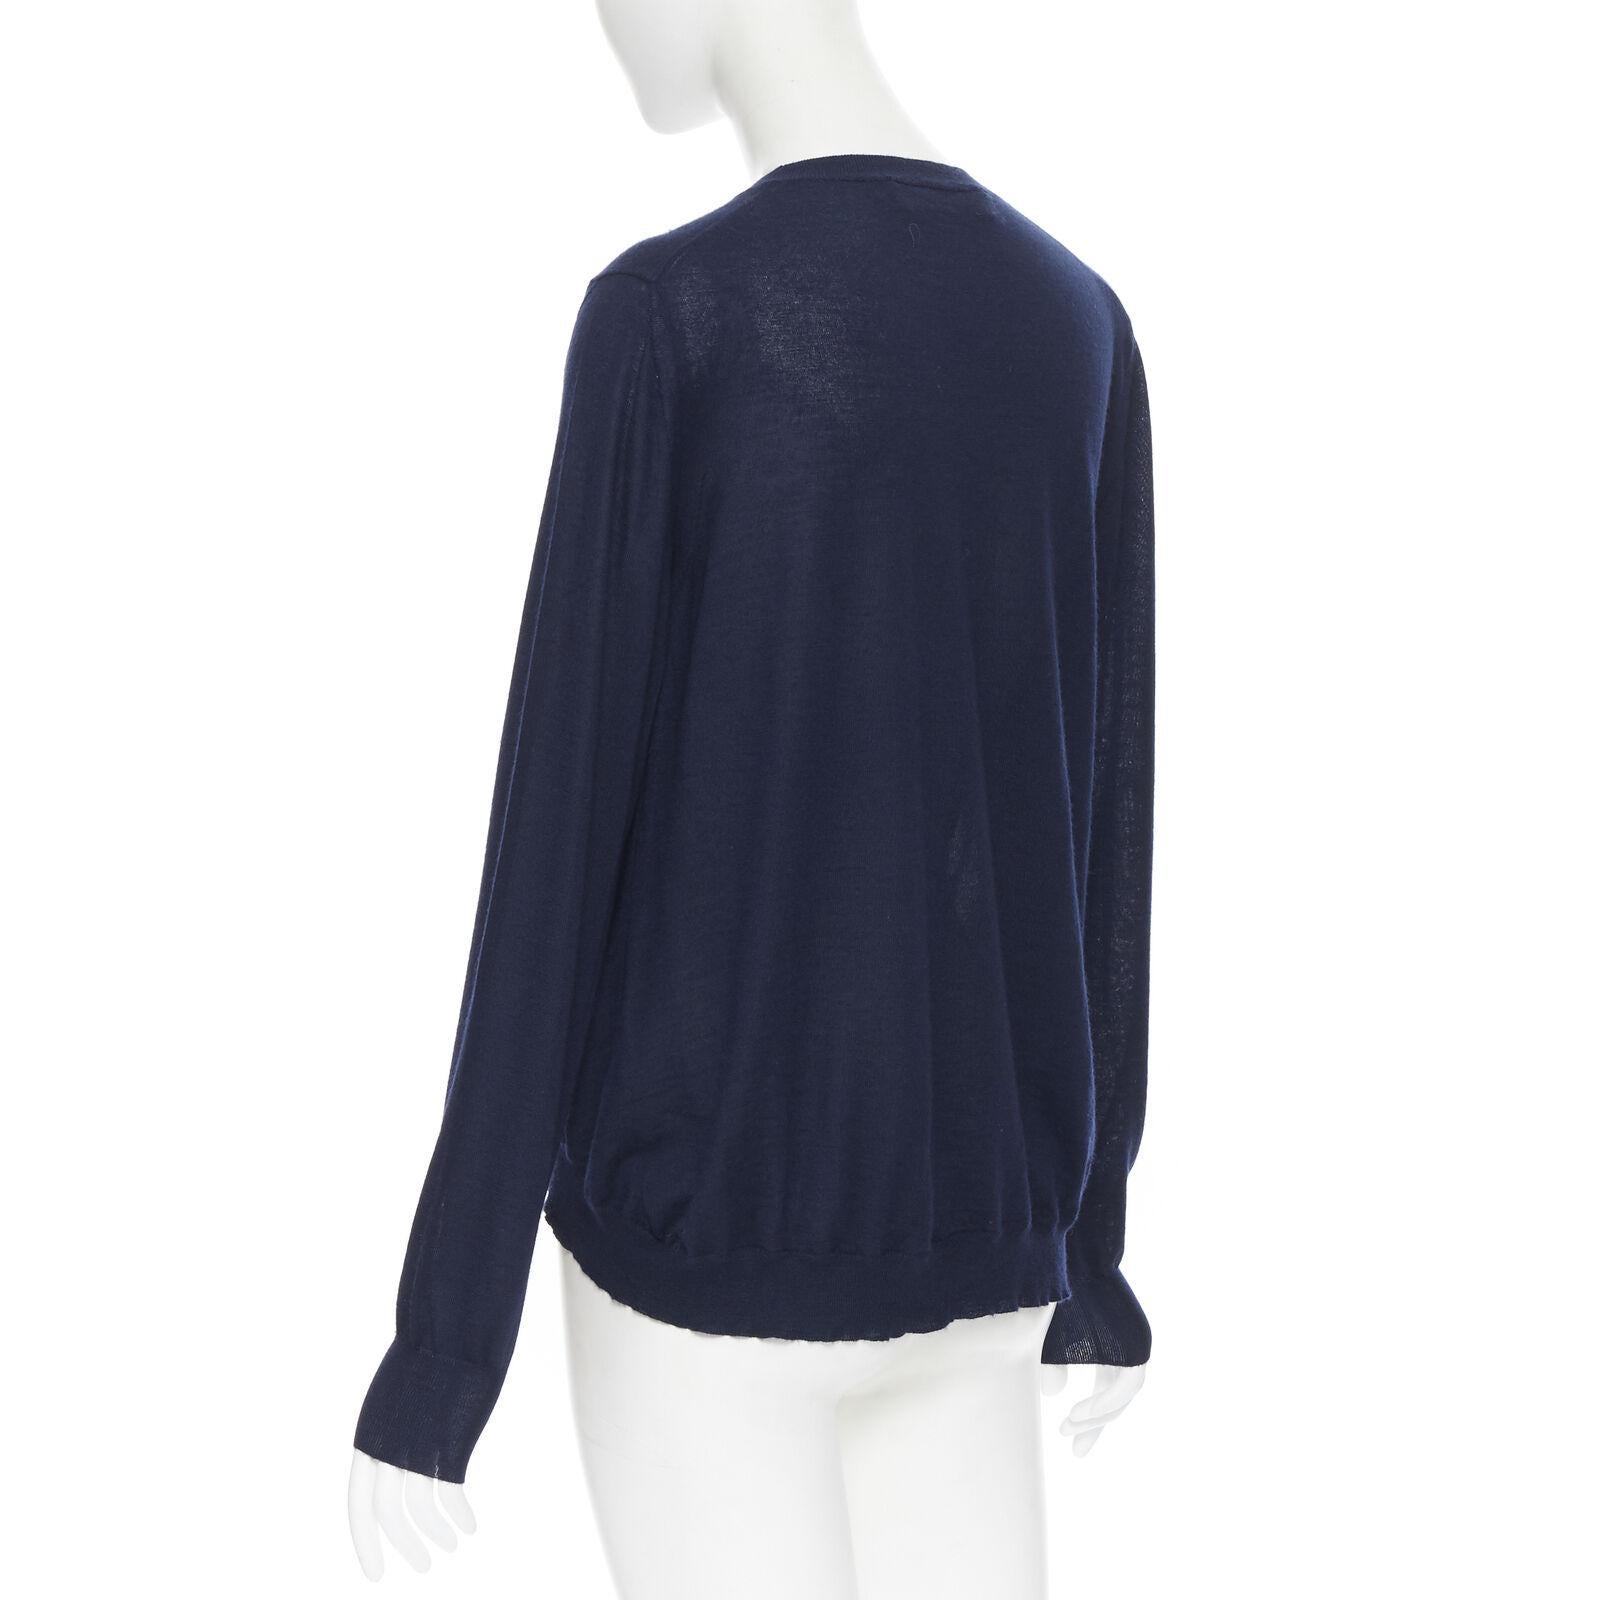 MARNI navy blue cashmere dual front slit pocket long sleeve sweater IT40 S 2